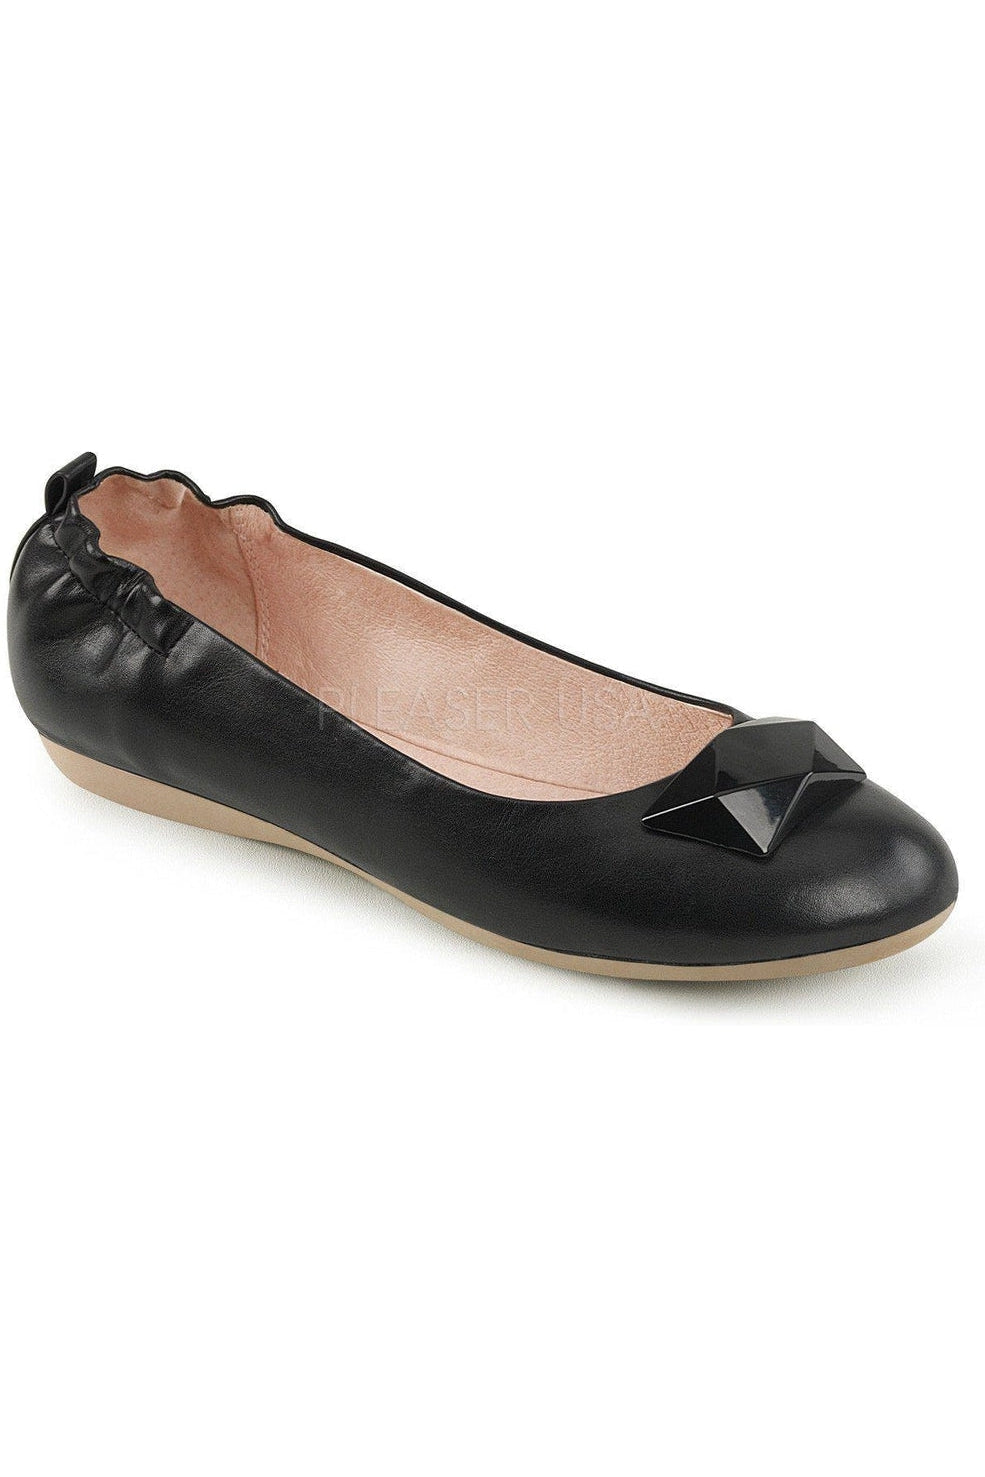 OLIVE-08-Black-Pin Up Couture-Black-Flats-SEXYSHOES.COM